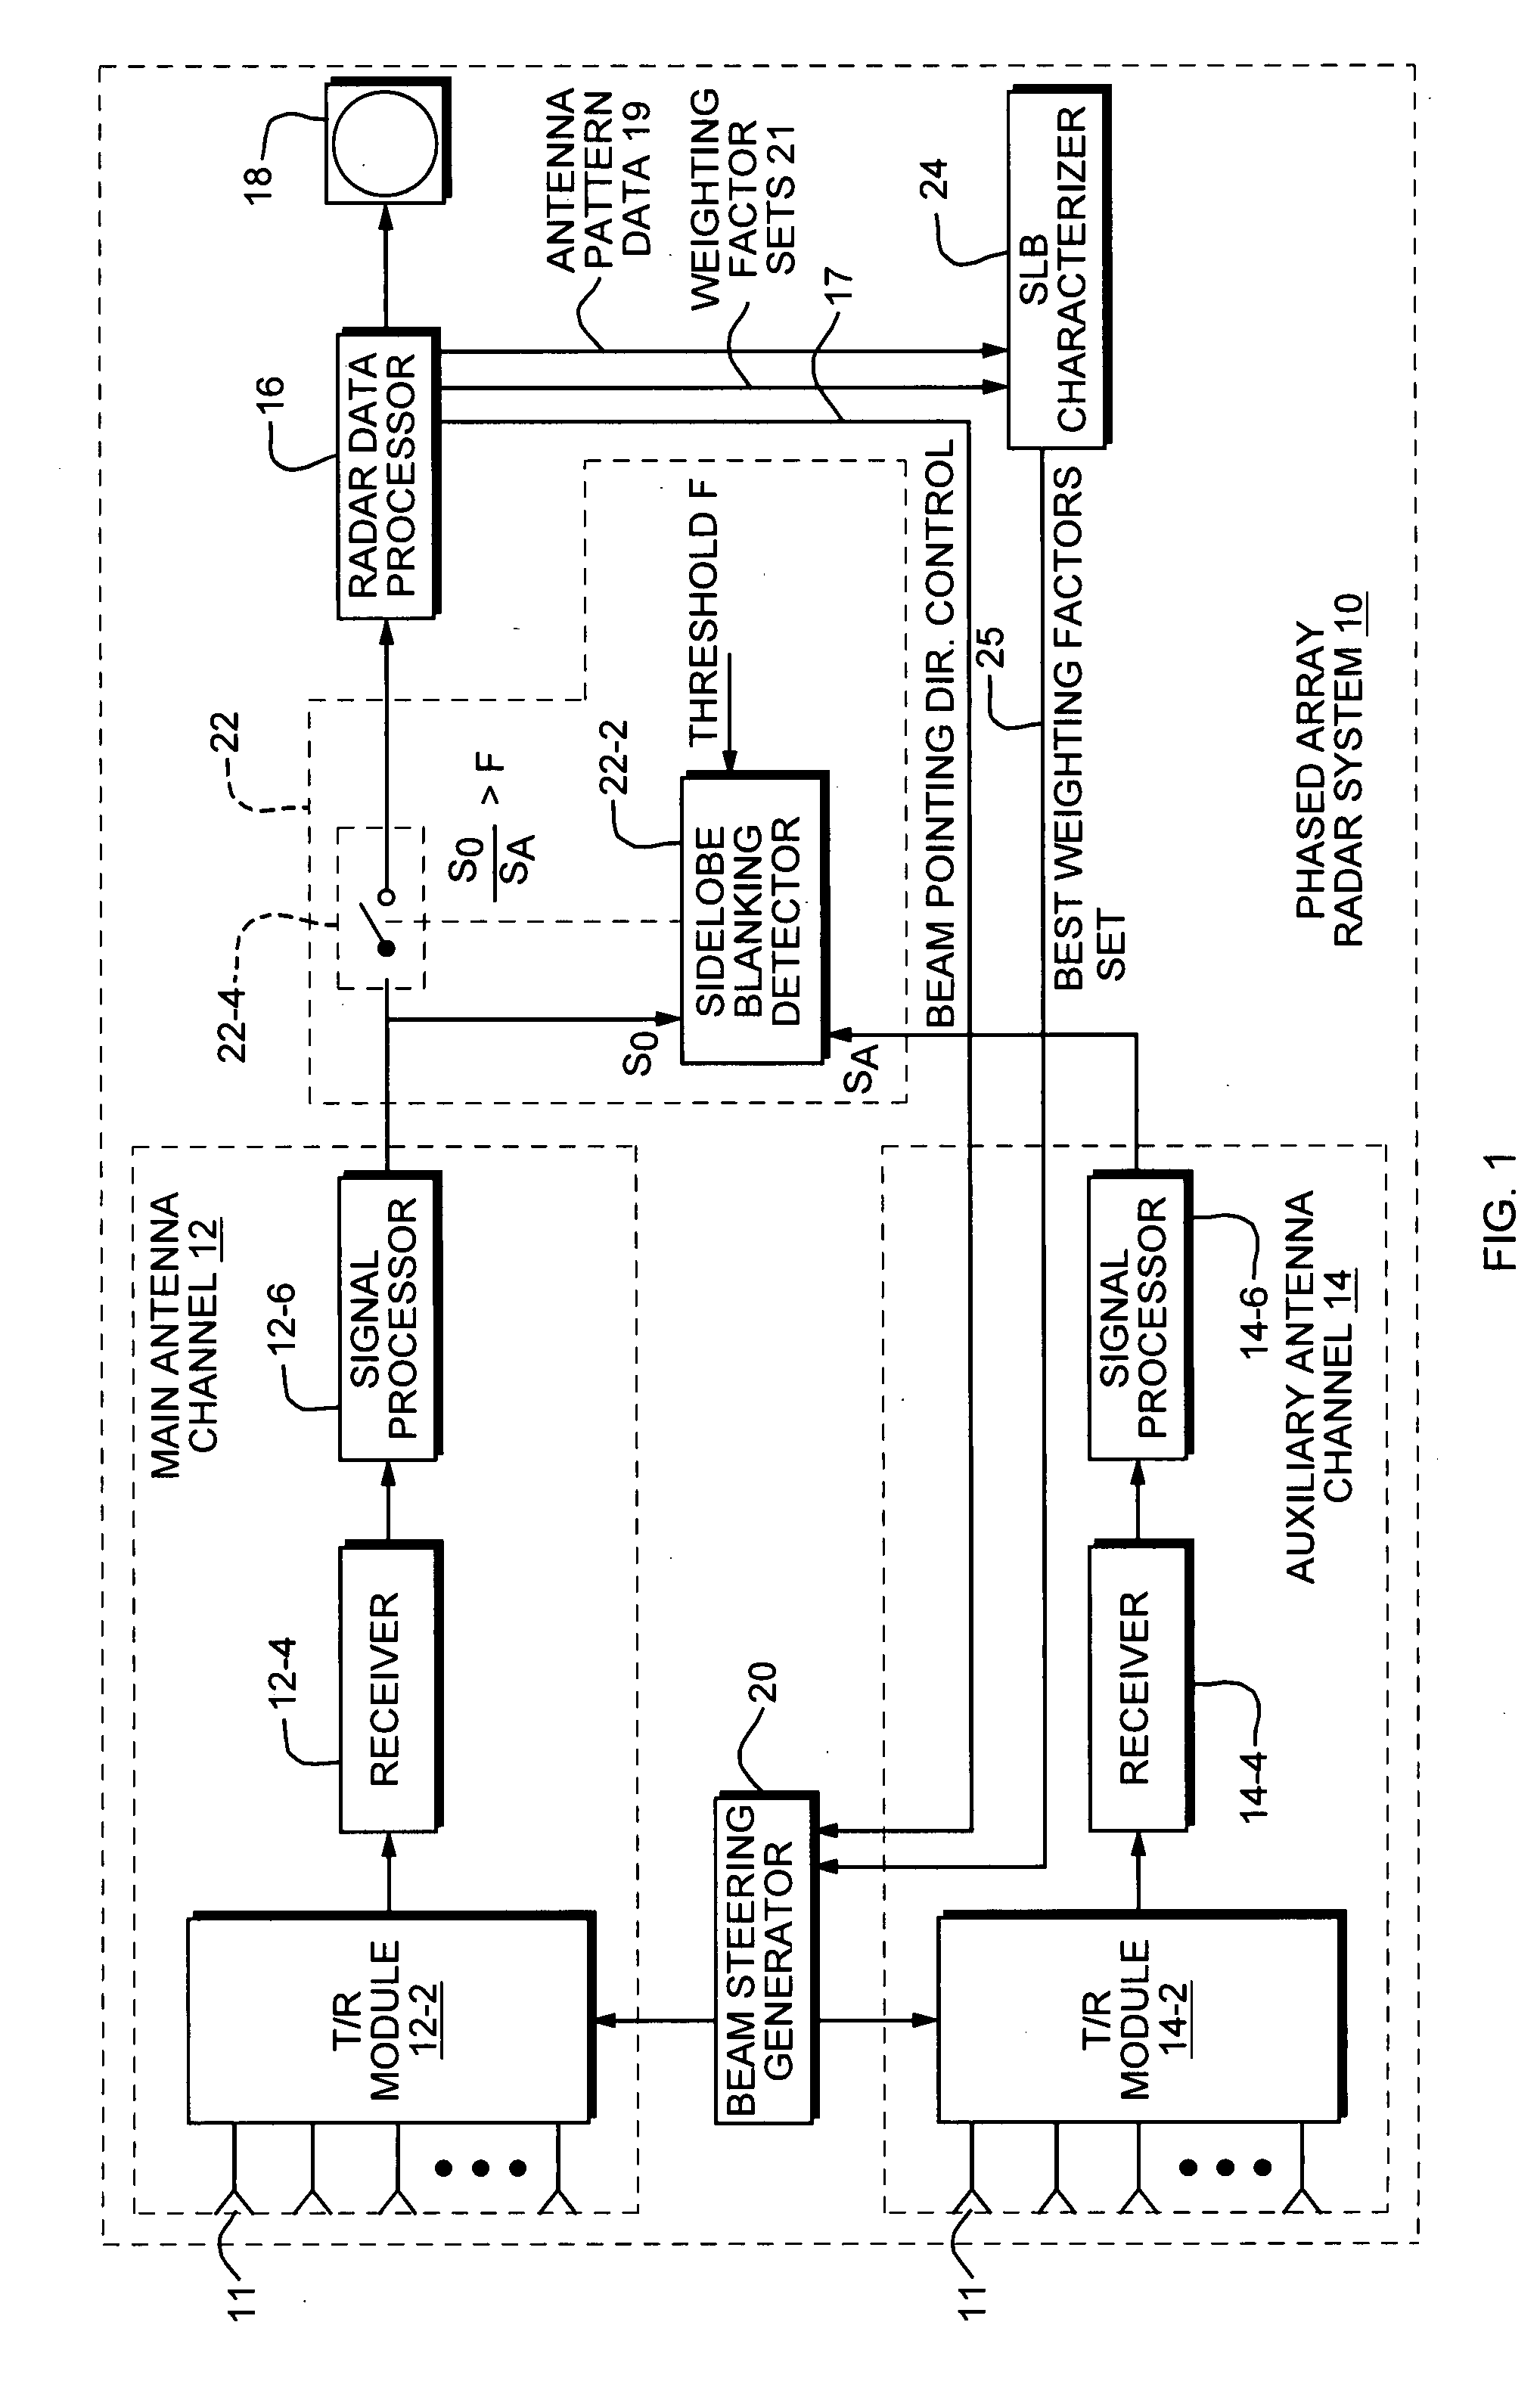 Sidelobe blanking characterizer system and method